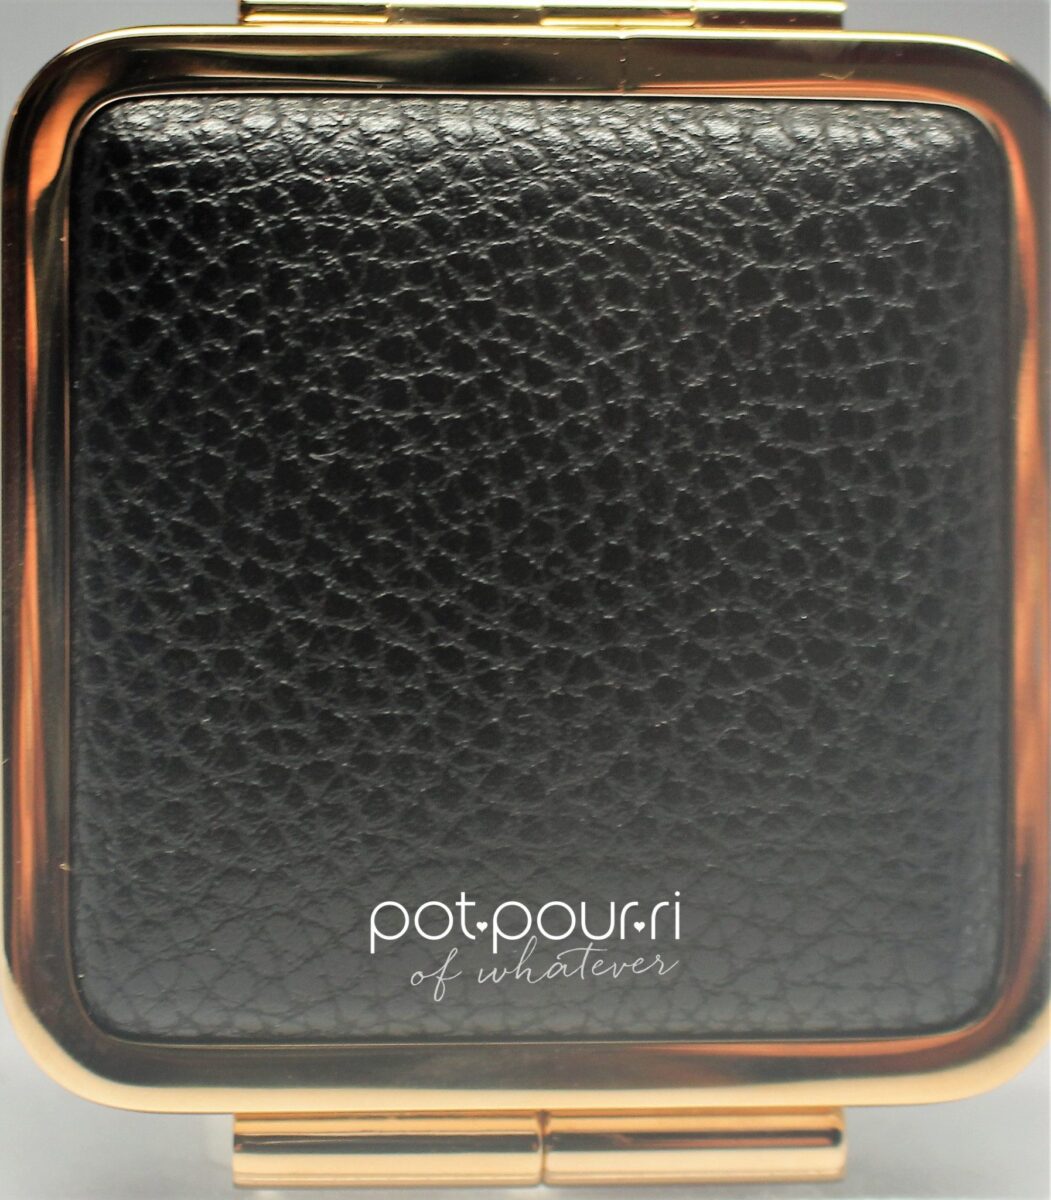 the cheek creme compact is leather-like with a pebbled texture and gold hardware